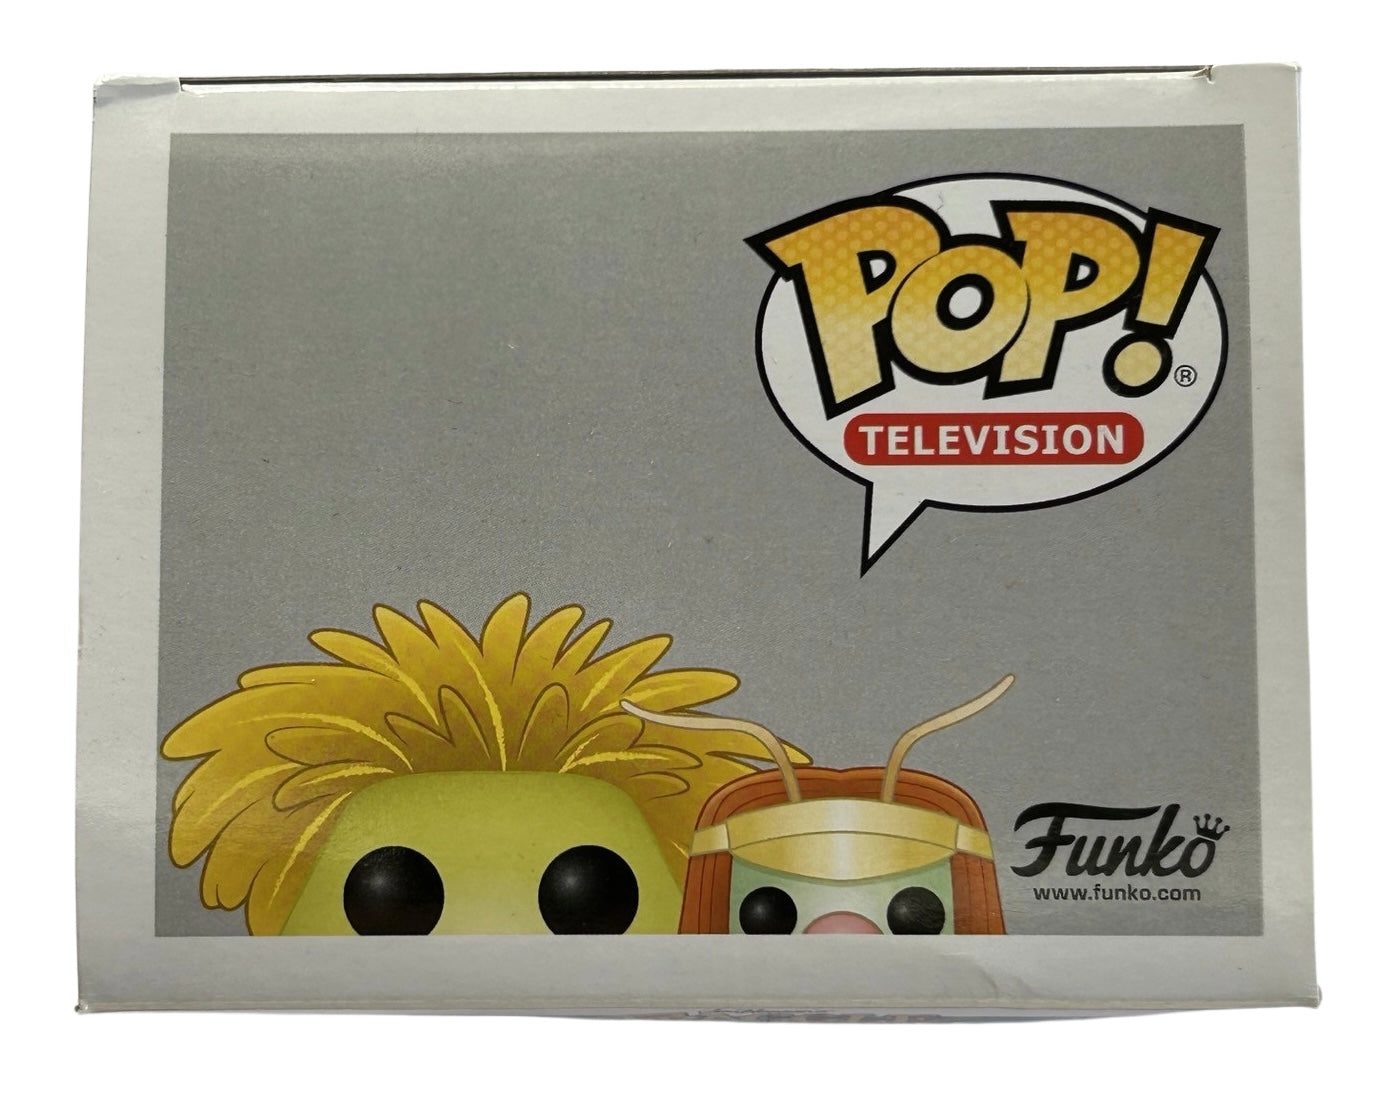 Funko Pop! Vinyl Fraggle Rock 35 Years - WEMBLEY WITH COTTERPIN #521 (2017 Release)